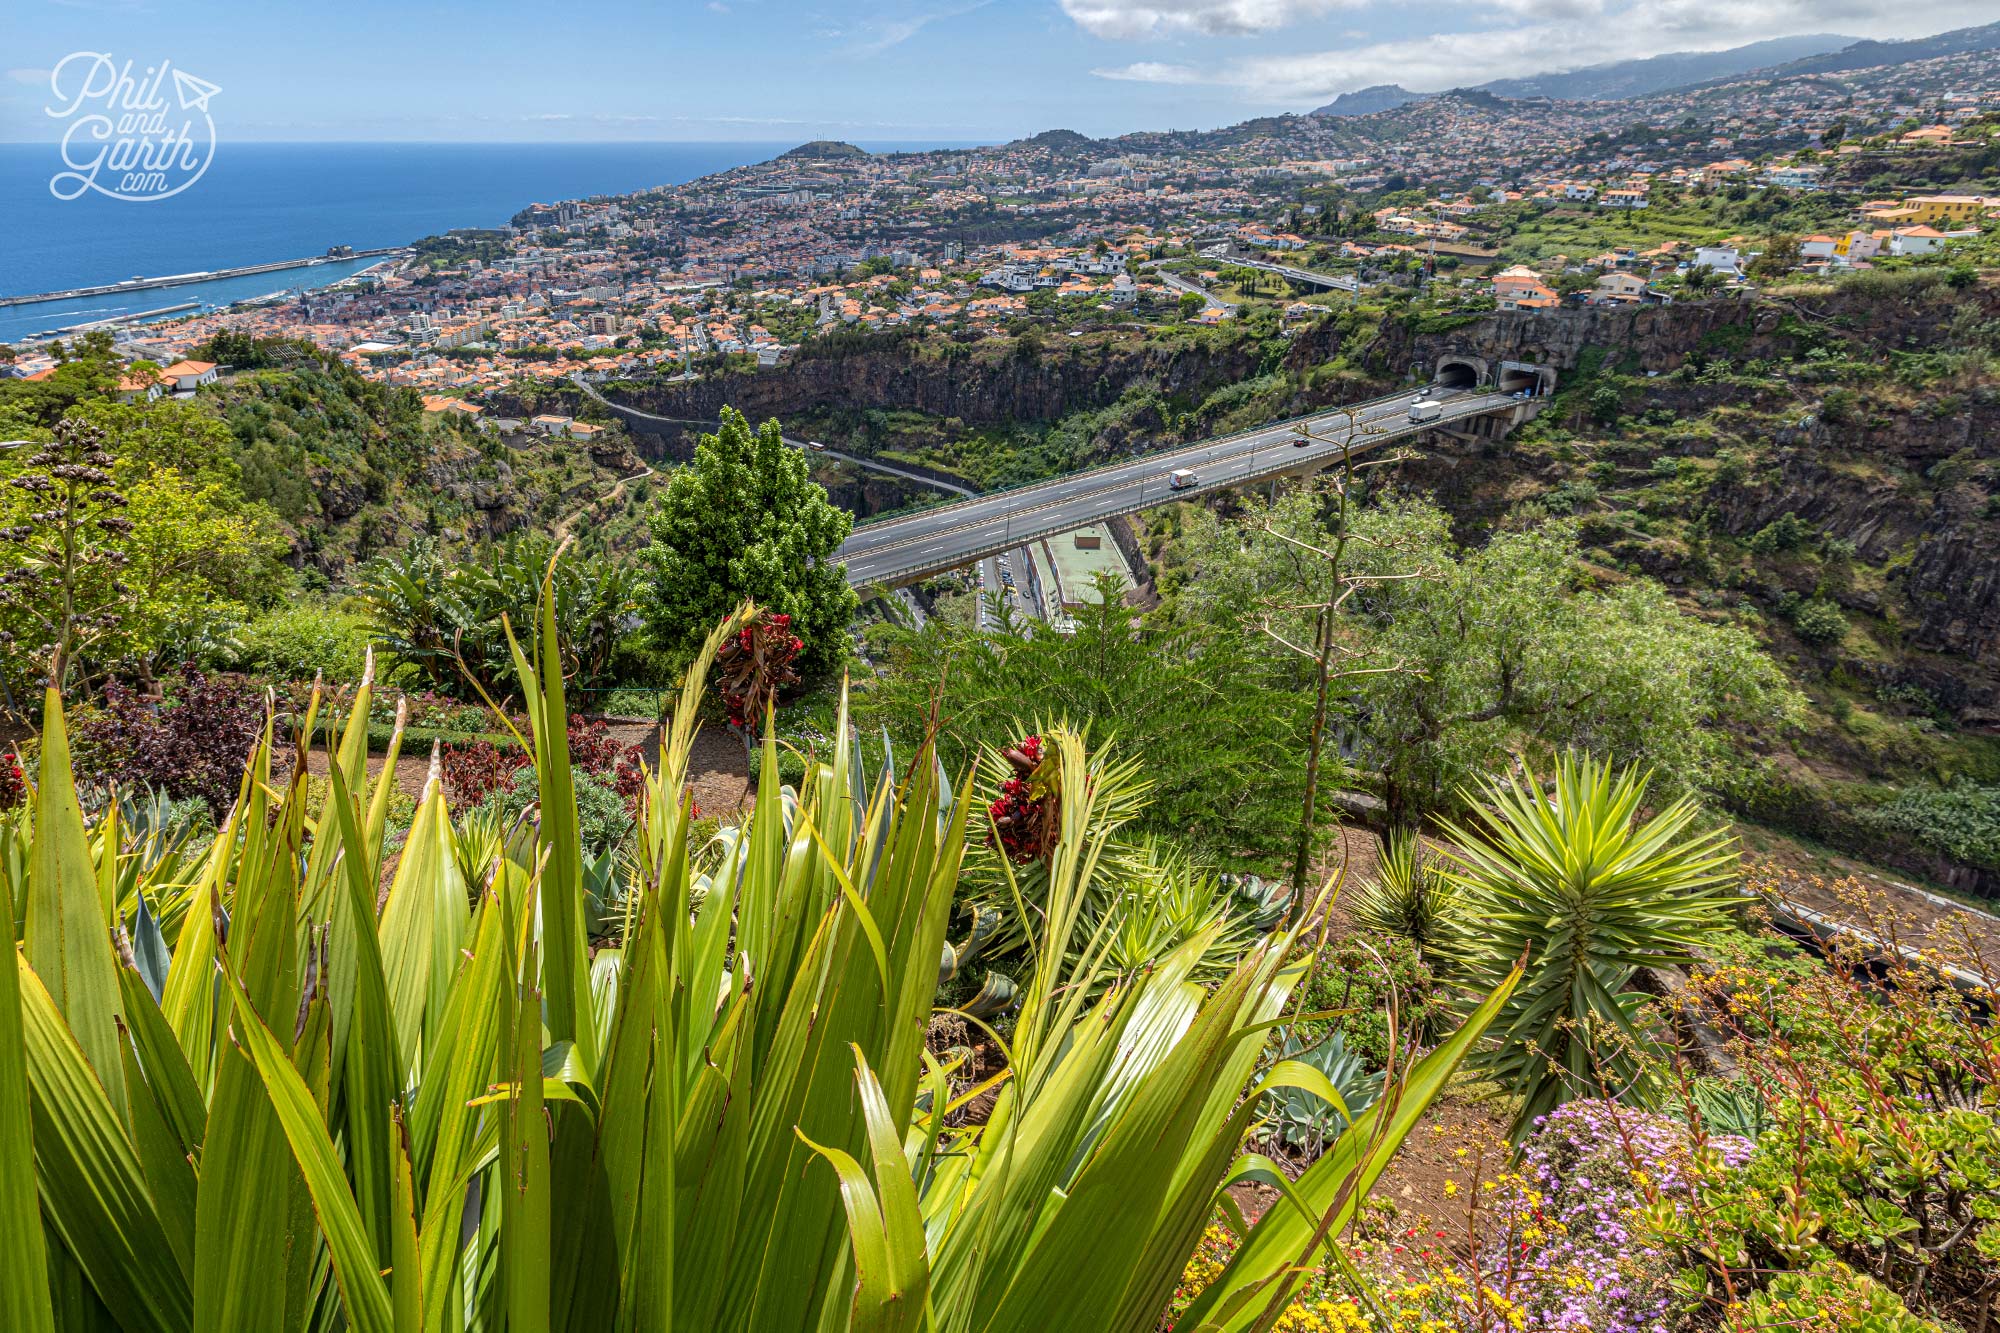 The views from the Botanic Garden over Funchal are amazing